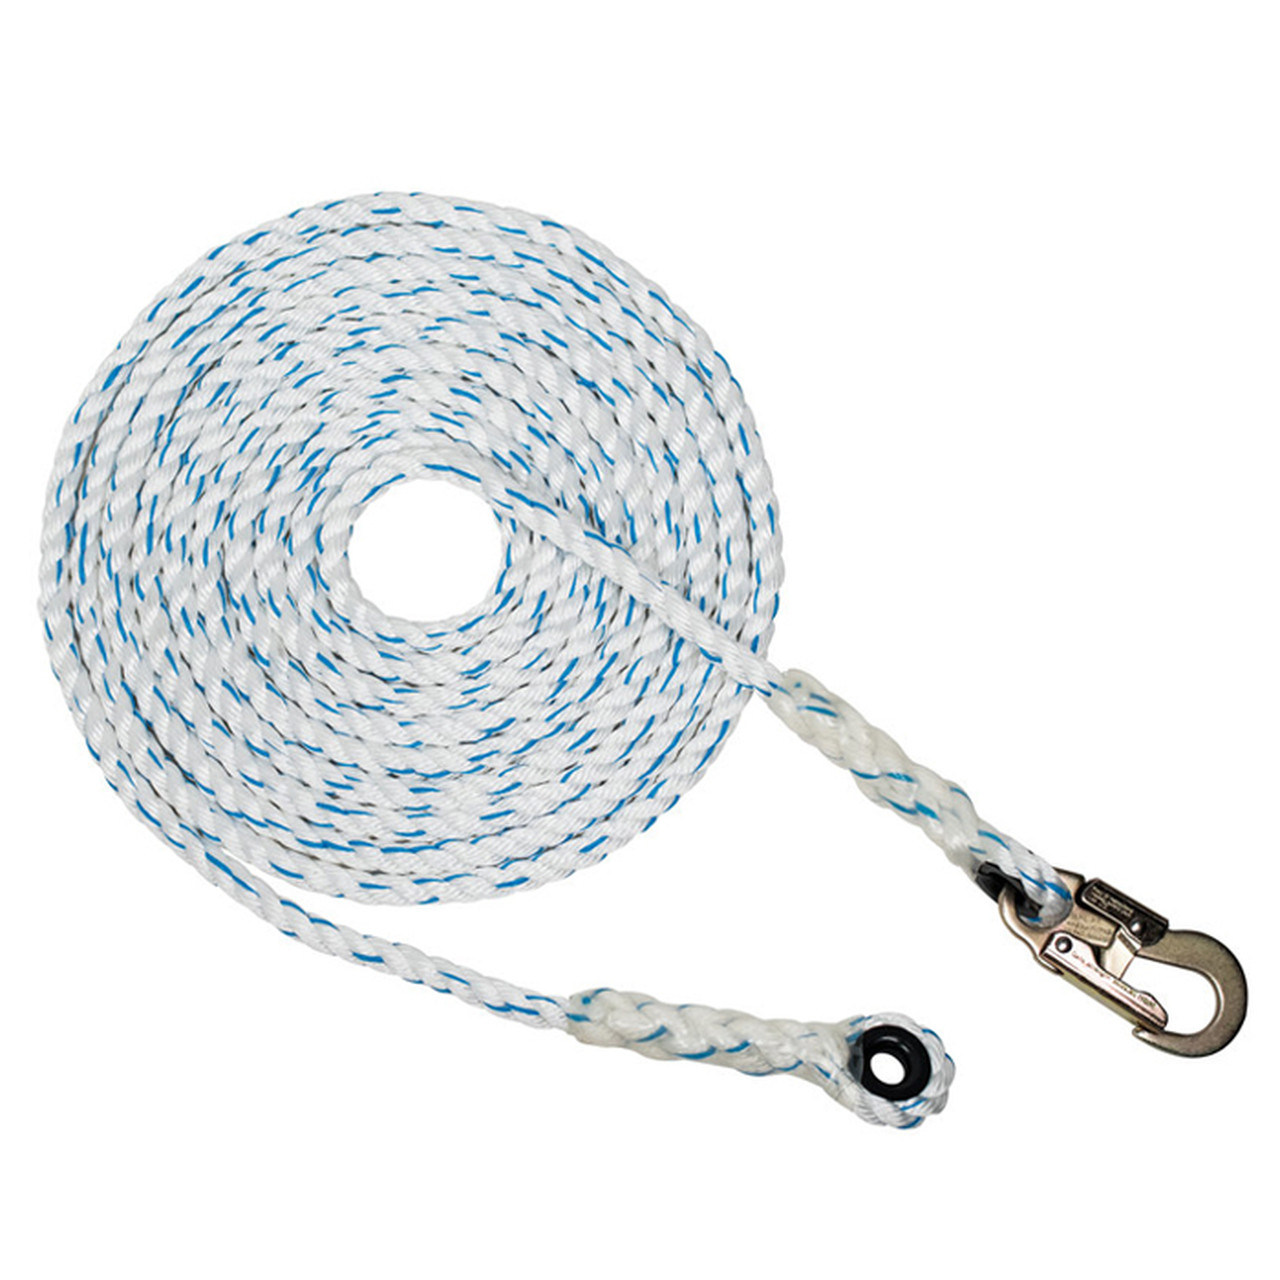 5/8 - 3 Strand Composite Vertical Lifeline - Hook & Thimble by Pelican Rope  - Assemblies & Lanyards